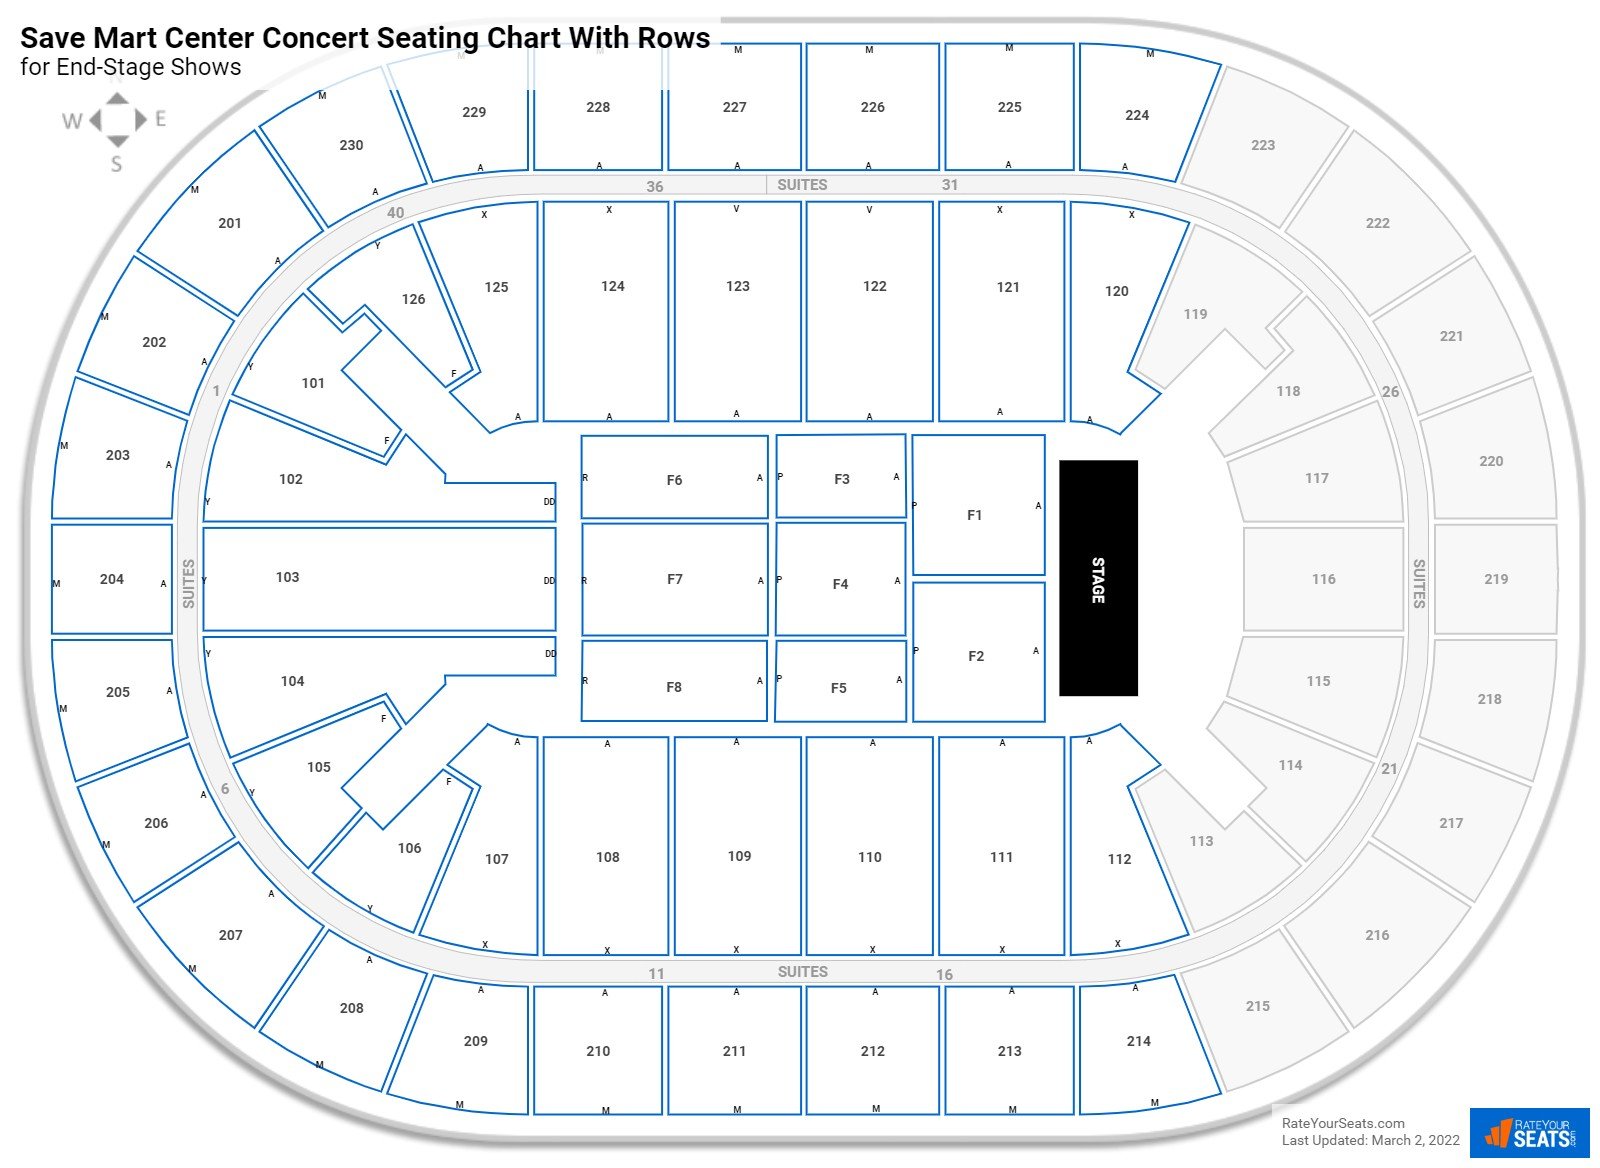 Save Mart Center seating chart with row numbers